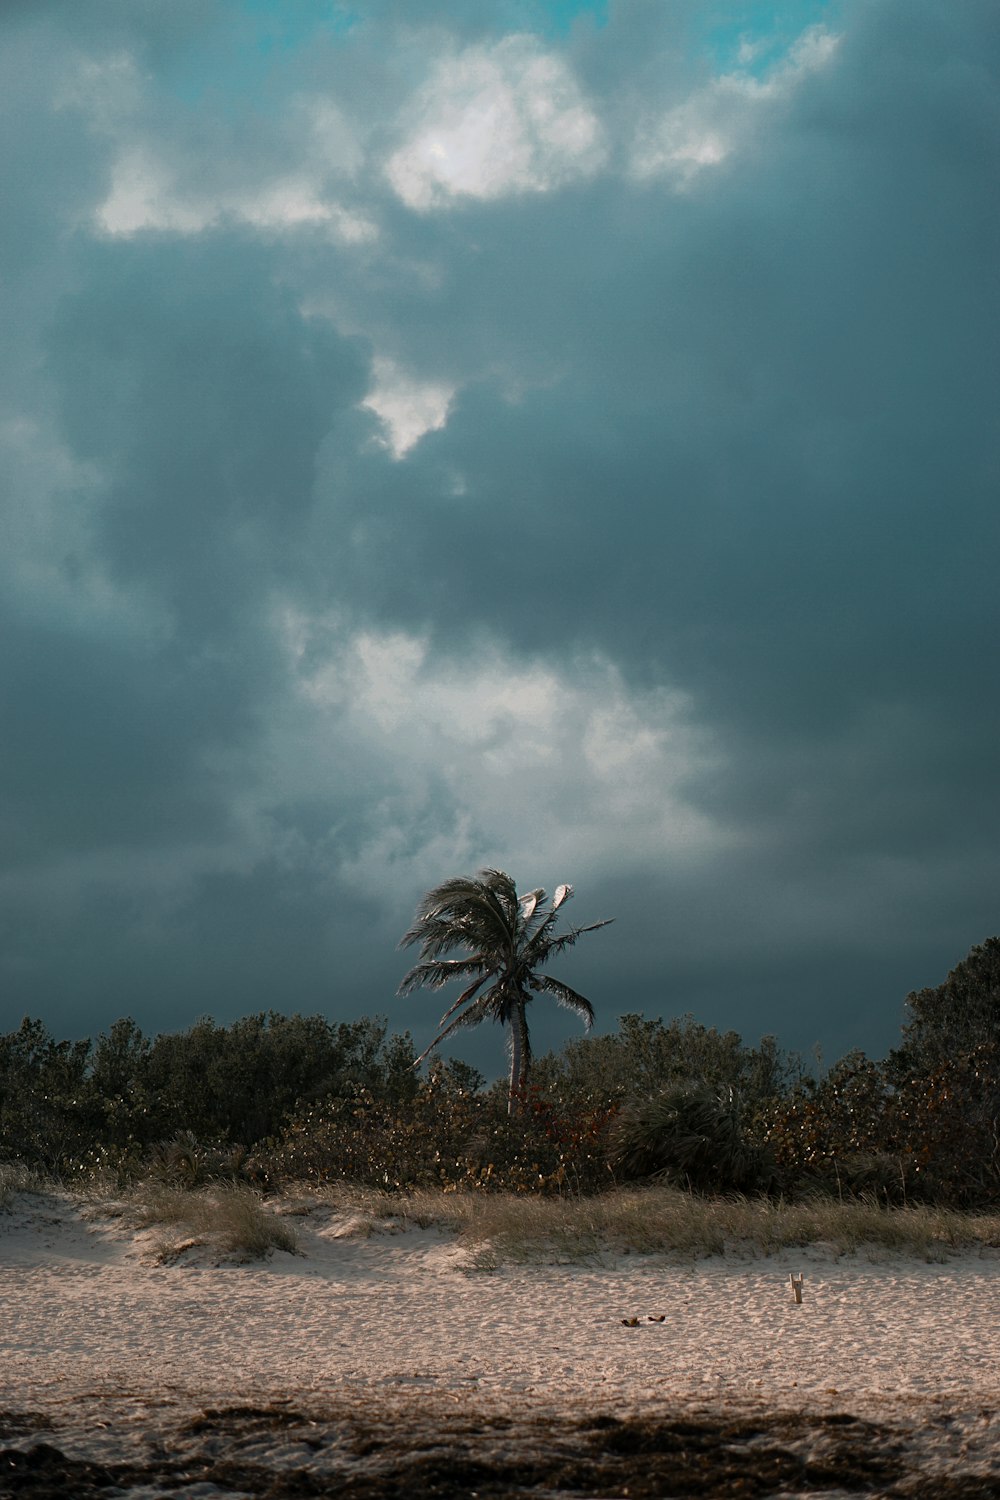 green coconut palm over other trees under gray clouds